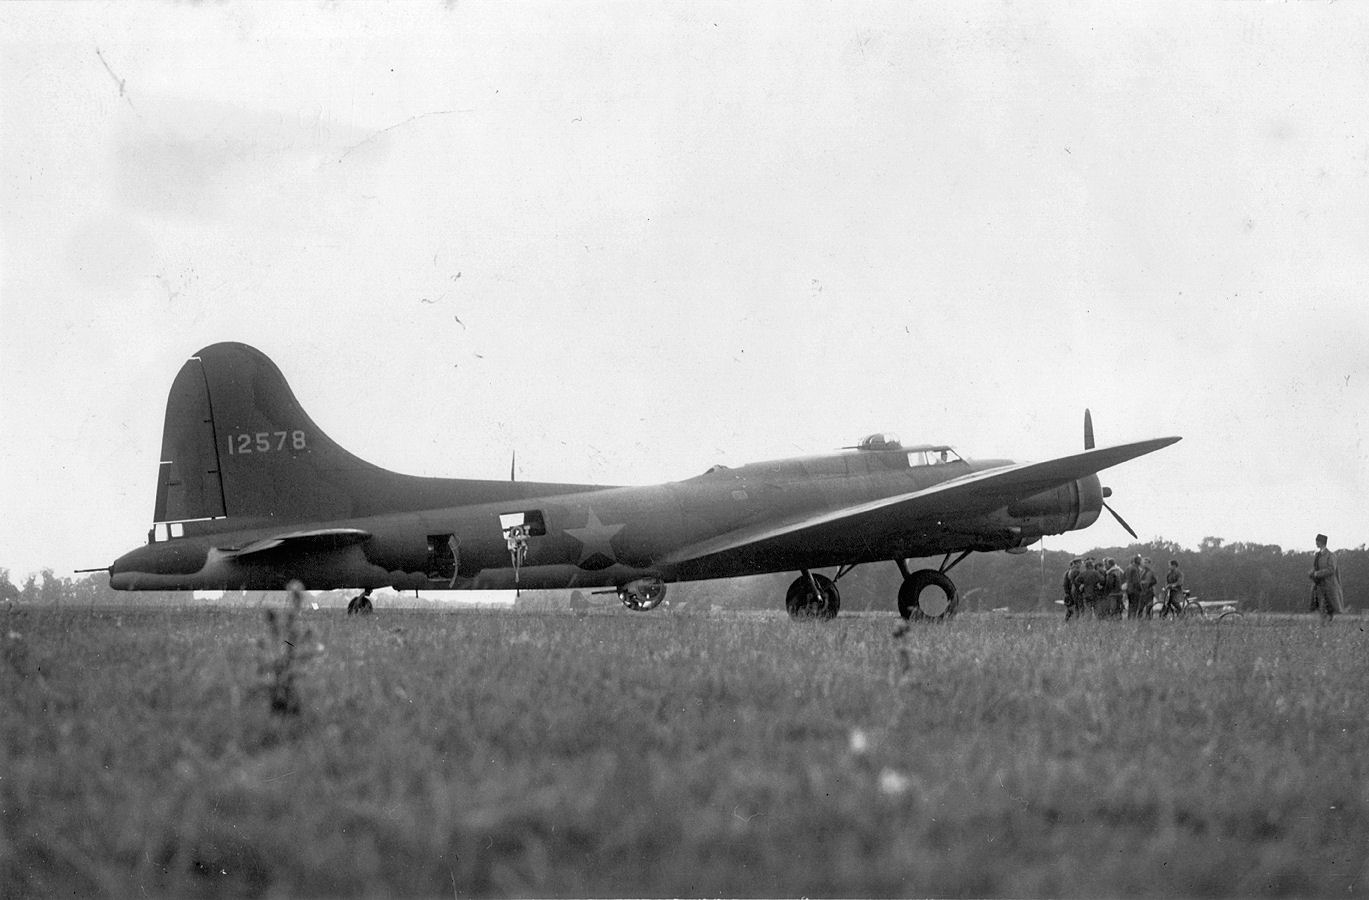 Boeing B-17E Flying Fortress 41-2587, 97th Bombardment Group, photographed 17 August 1942. (Imperial War Museum, Roger Freeman Collection, Object Number FRE 4053)